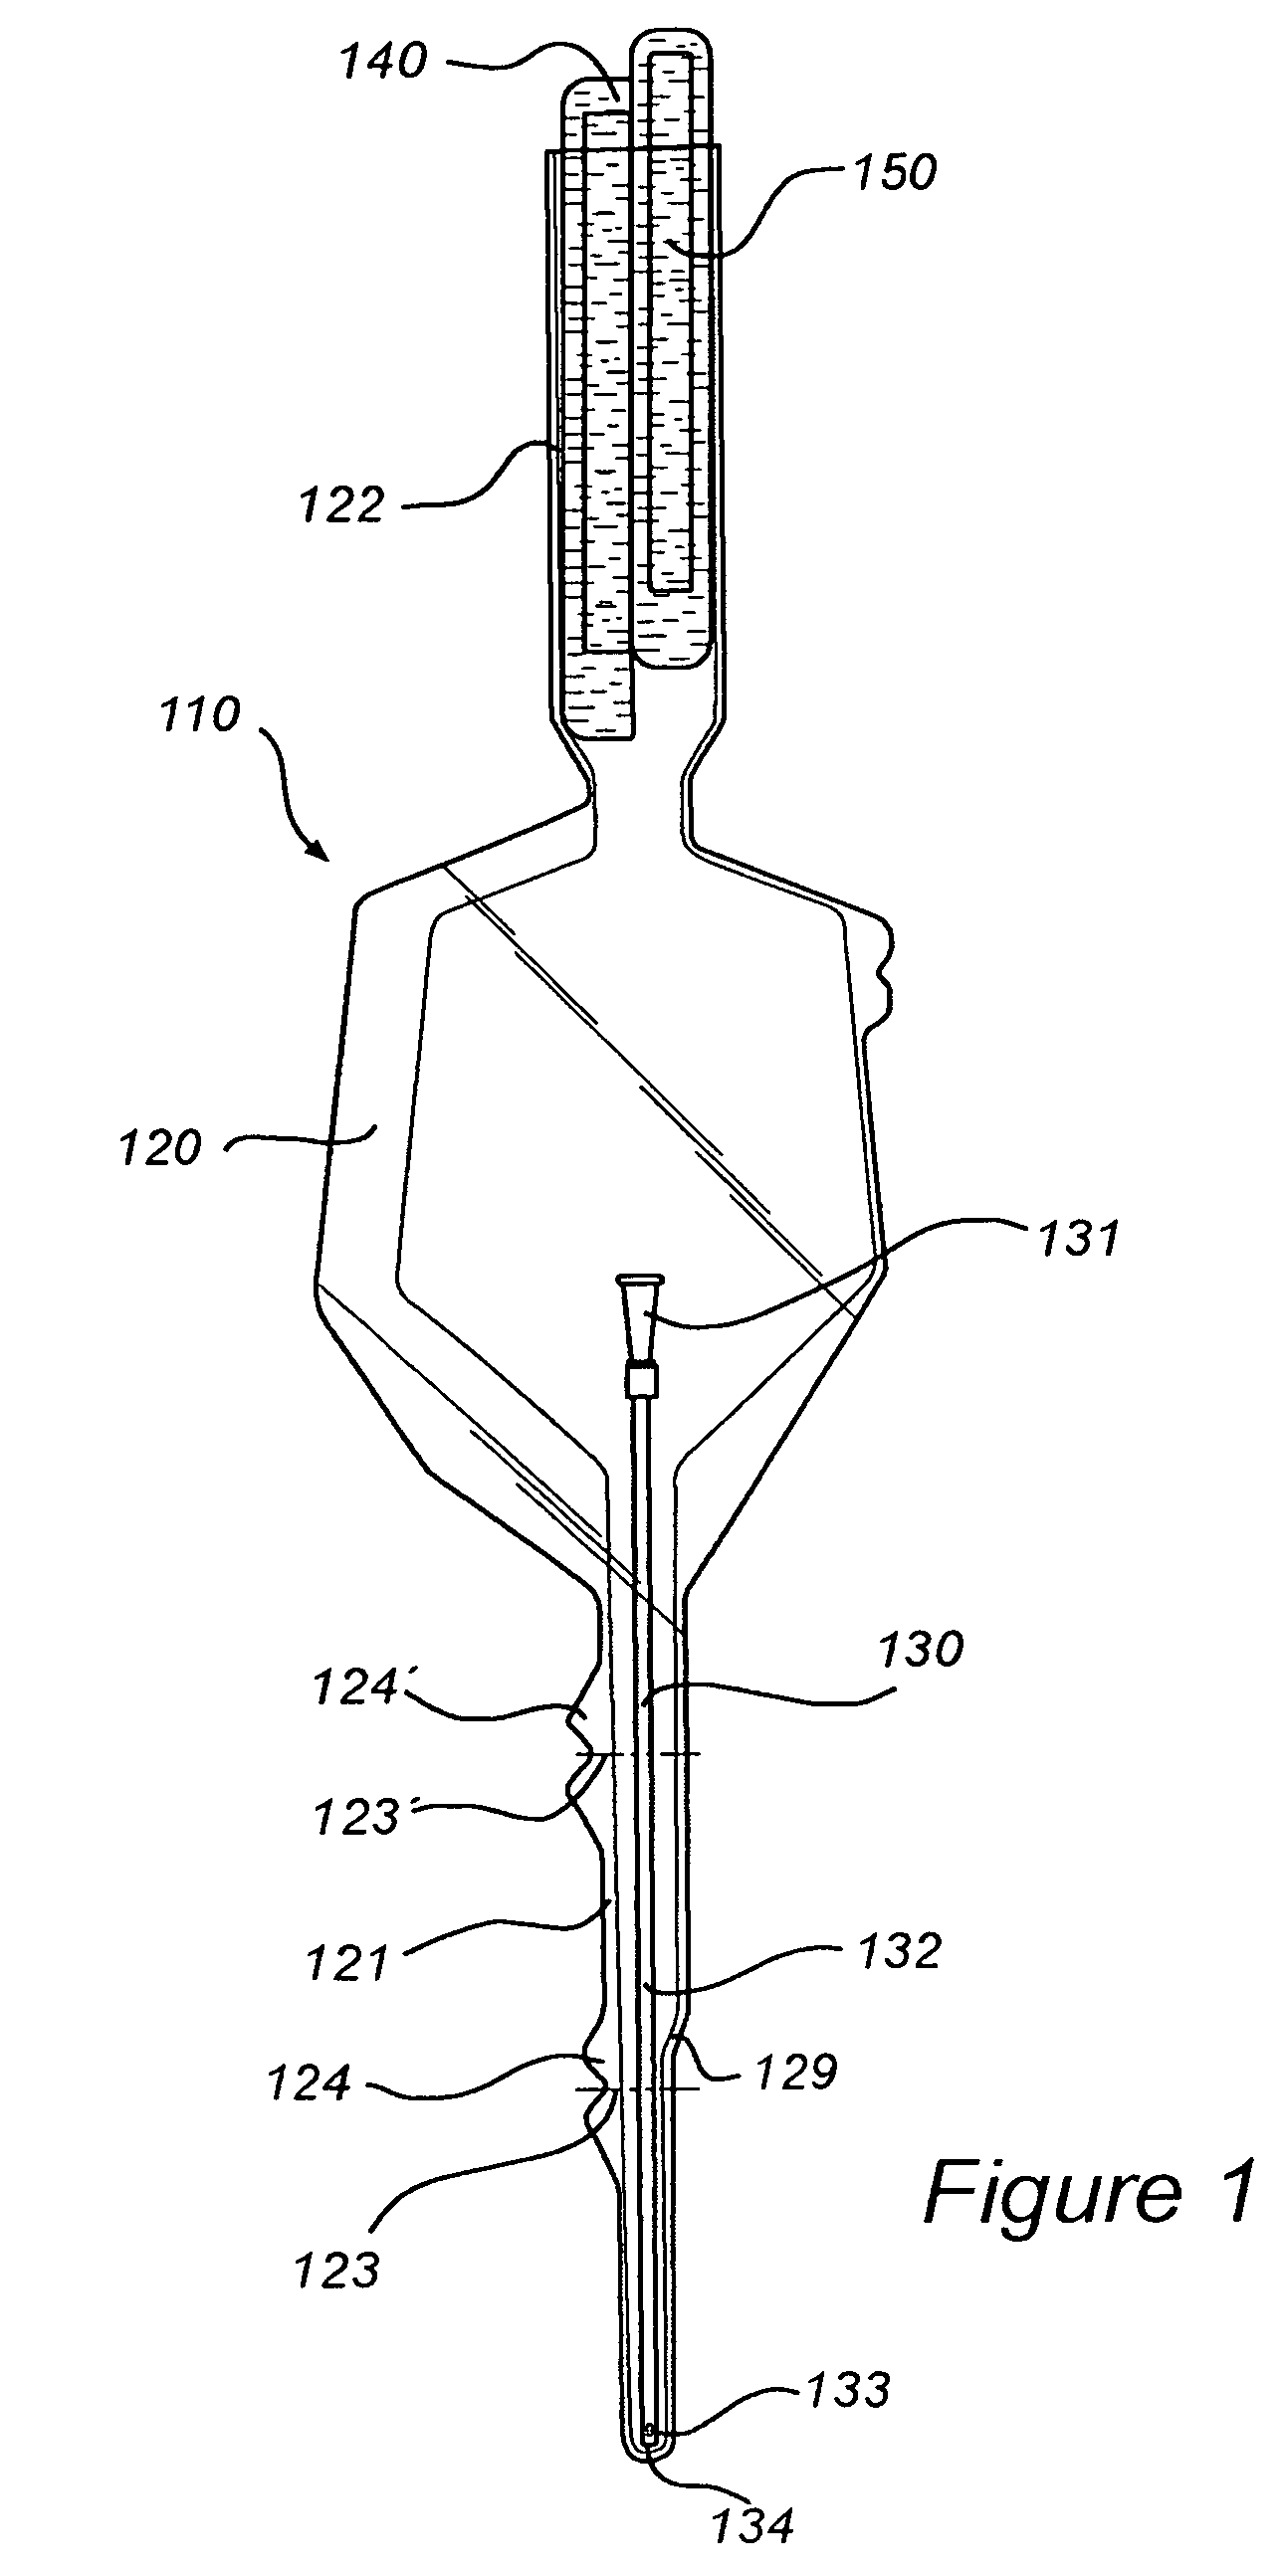 Catheter receptacle provided with an antimicrobial compound